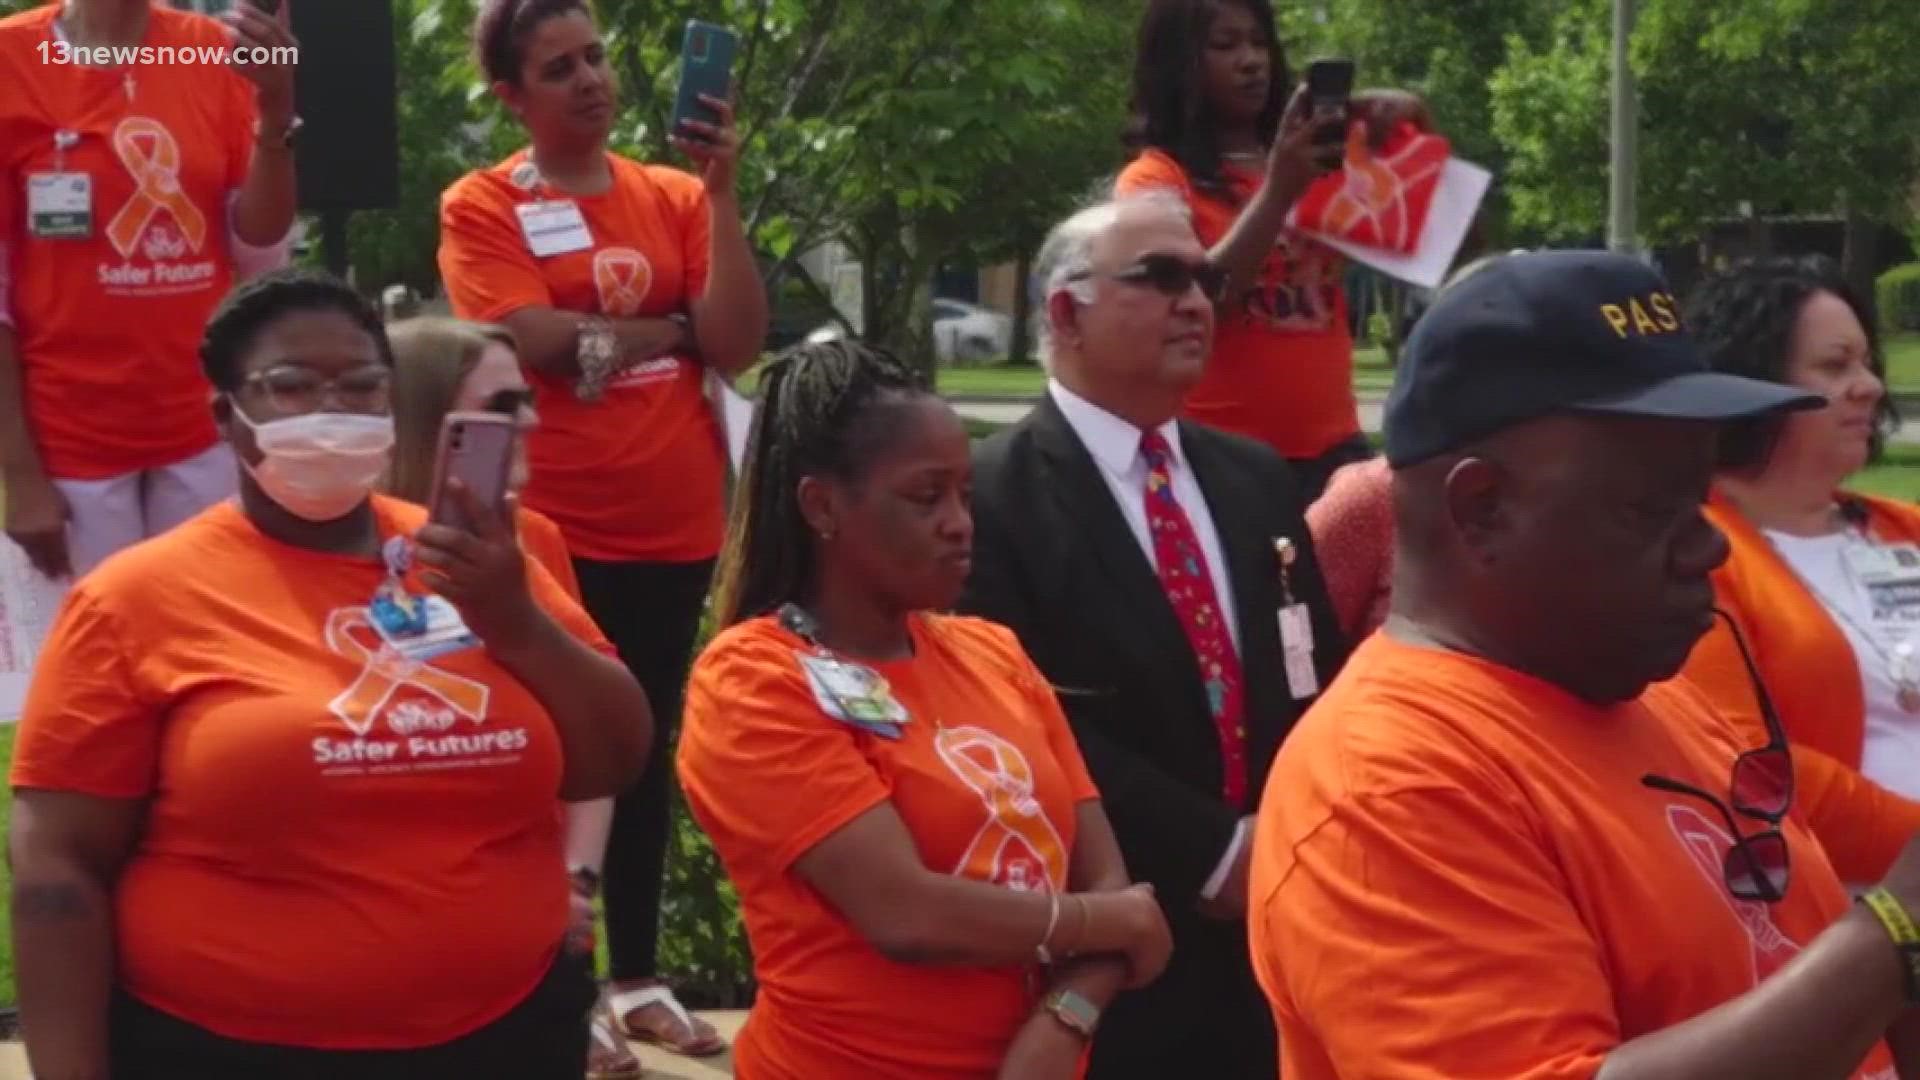 Friday is National Gun Violence Awareness Day. In Norfolk, hospitals are calling for an end to the shootings and honoring victims.